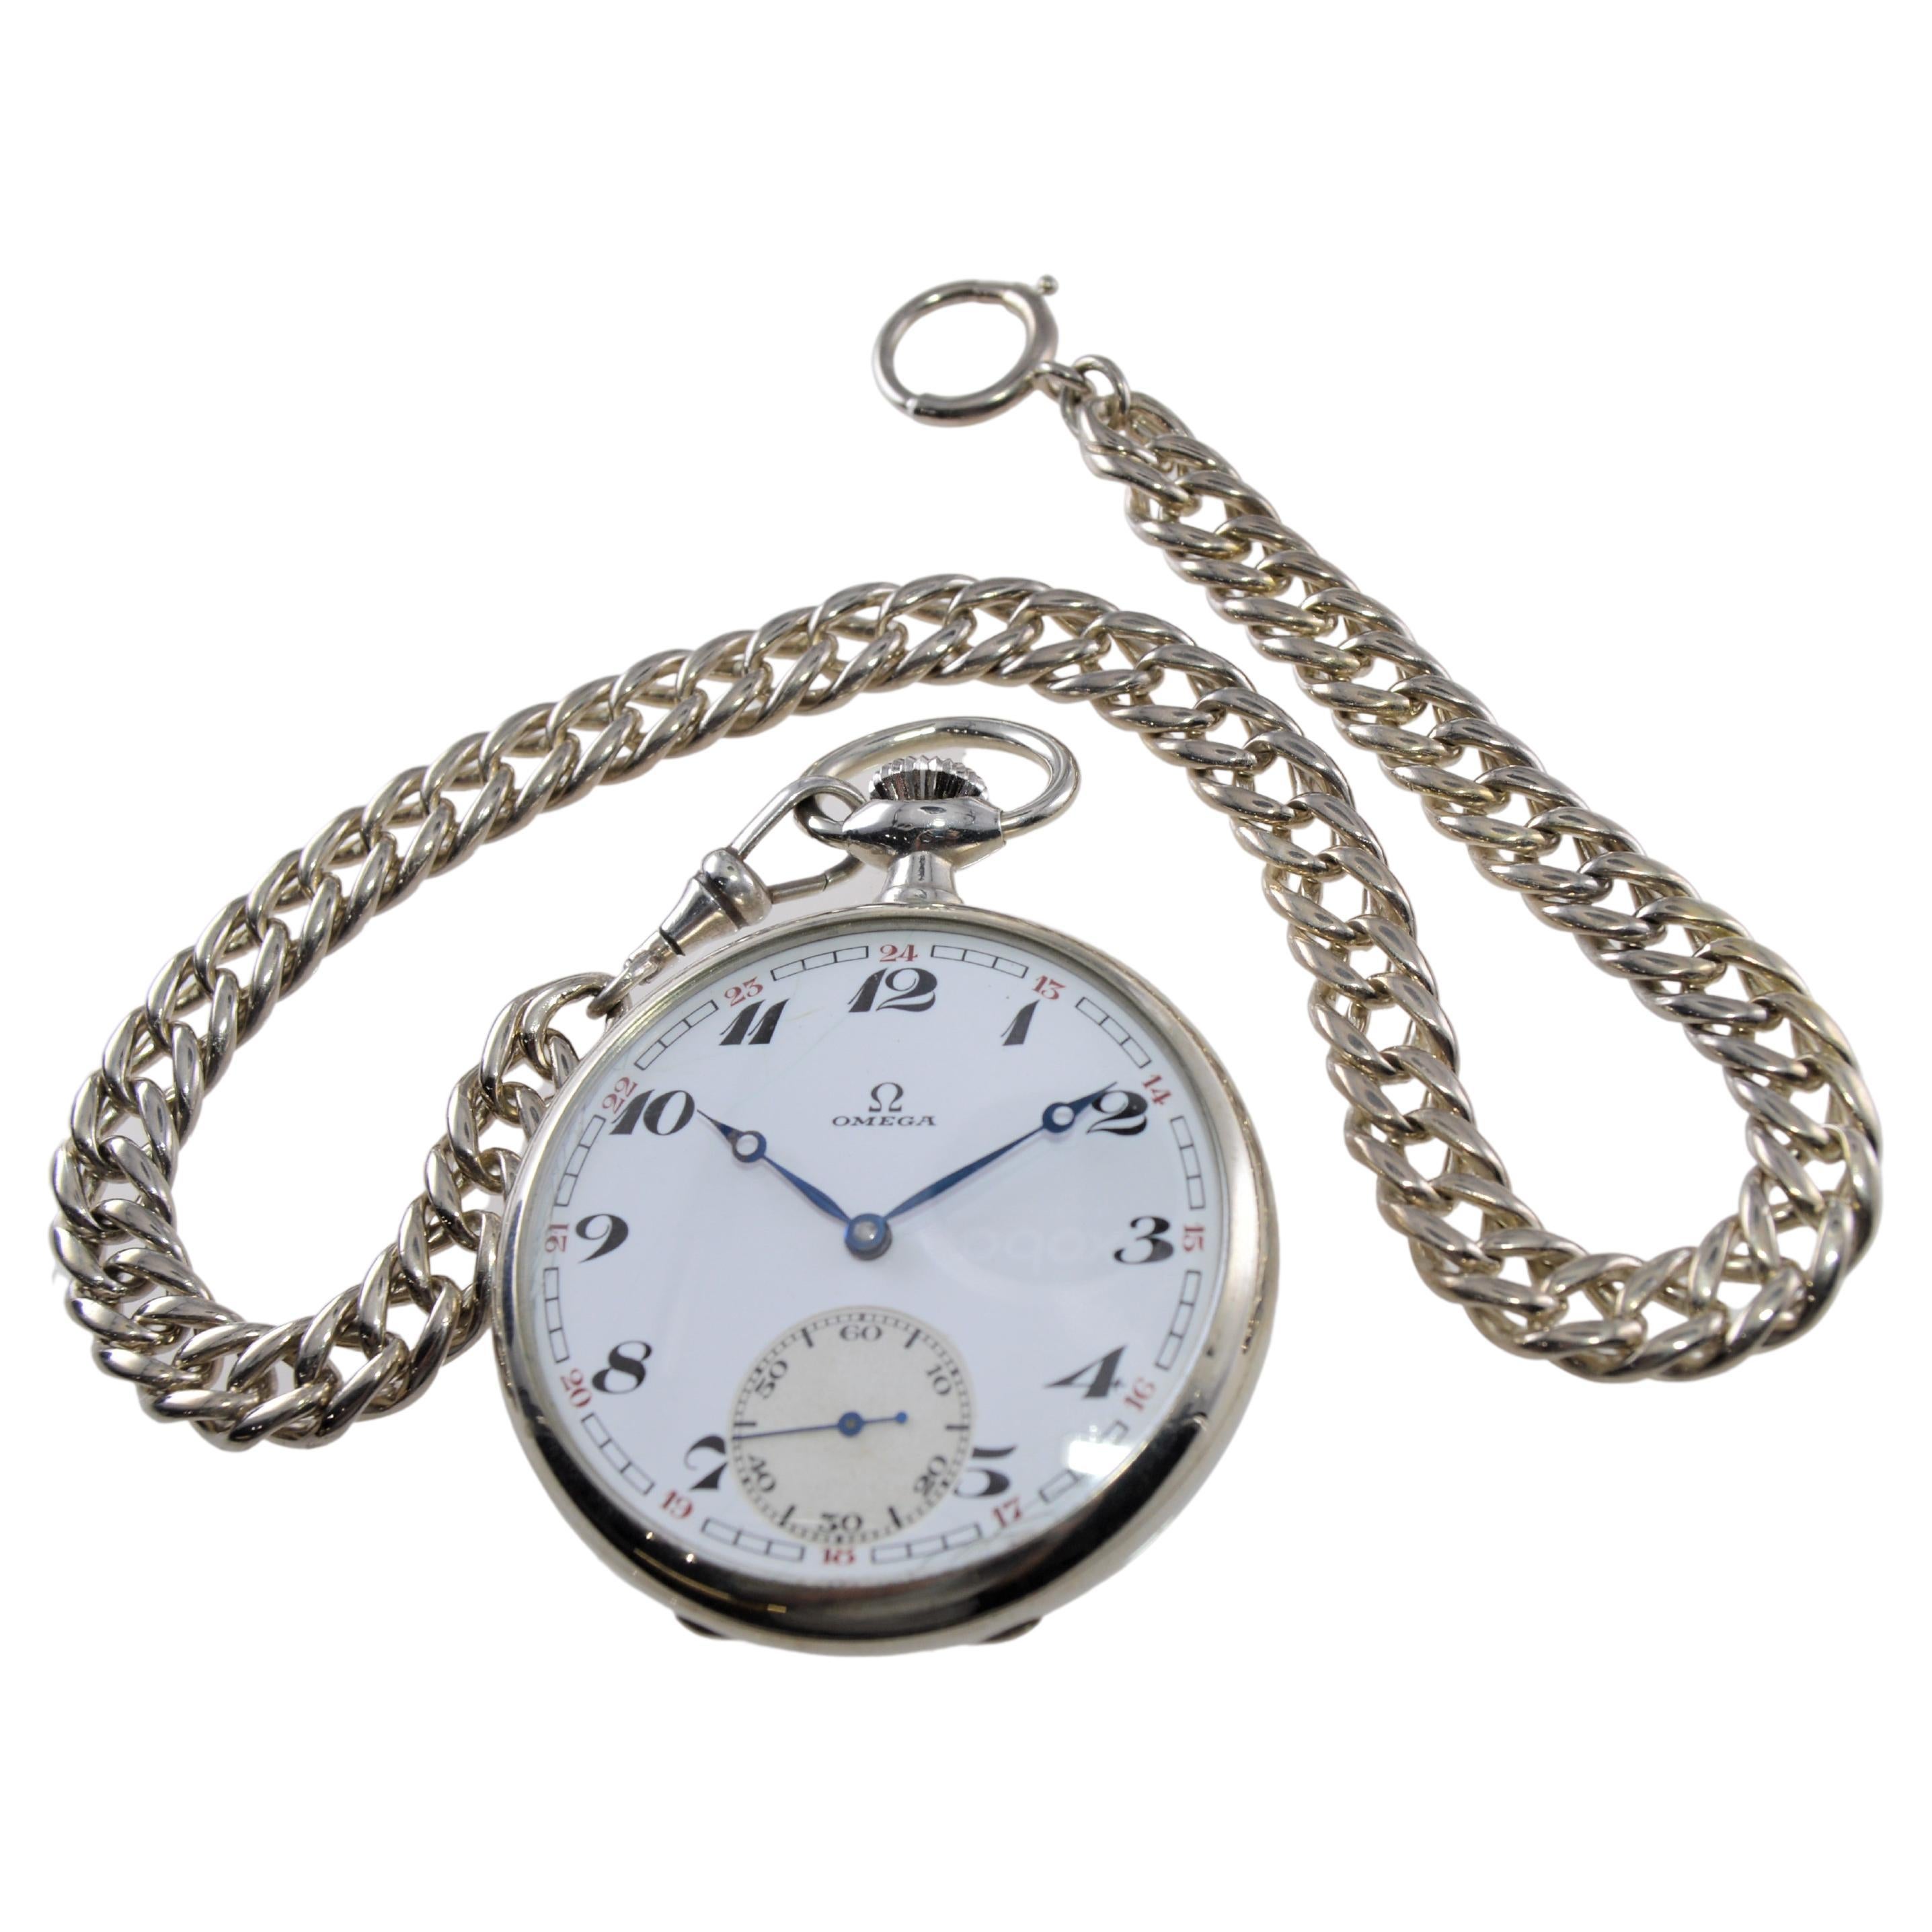 FACTORY / HOUSE: Omega Watch Company
STYLE / REFERENCE: Open Faced Pocket Watch
METAL / MATERIAL: Nickel Silver
CIRCA / YEAR: 1928 / 29
DIMENSIONS / SIZE:  Diameter 49mm
MOVEMENT / CALIBER: Manual Winding / 15 Jewels 
DIAL / HANDS: Original Rare,